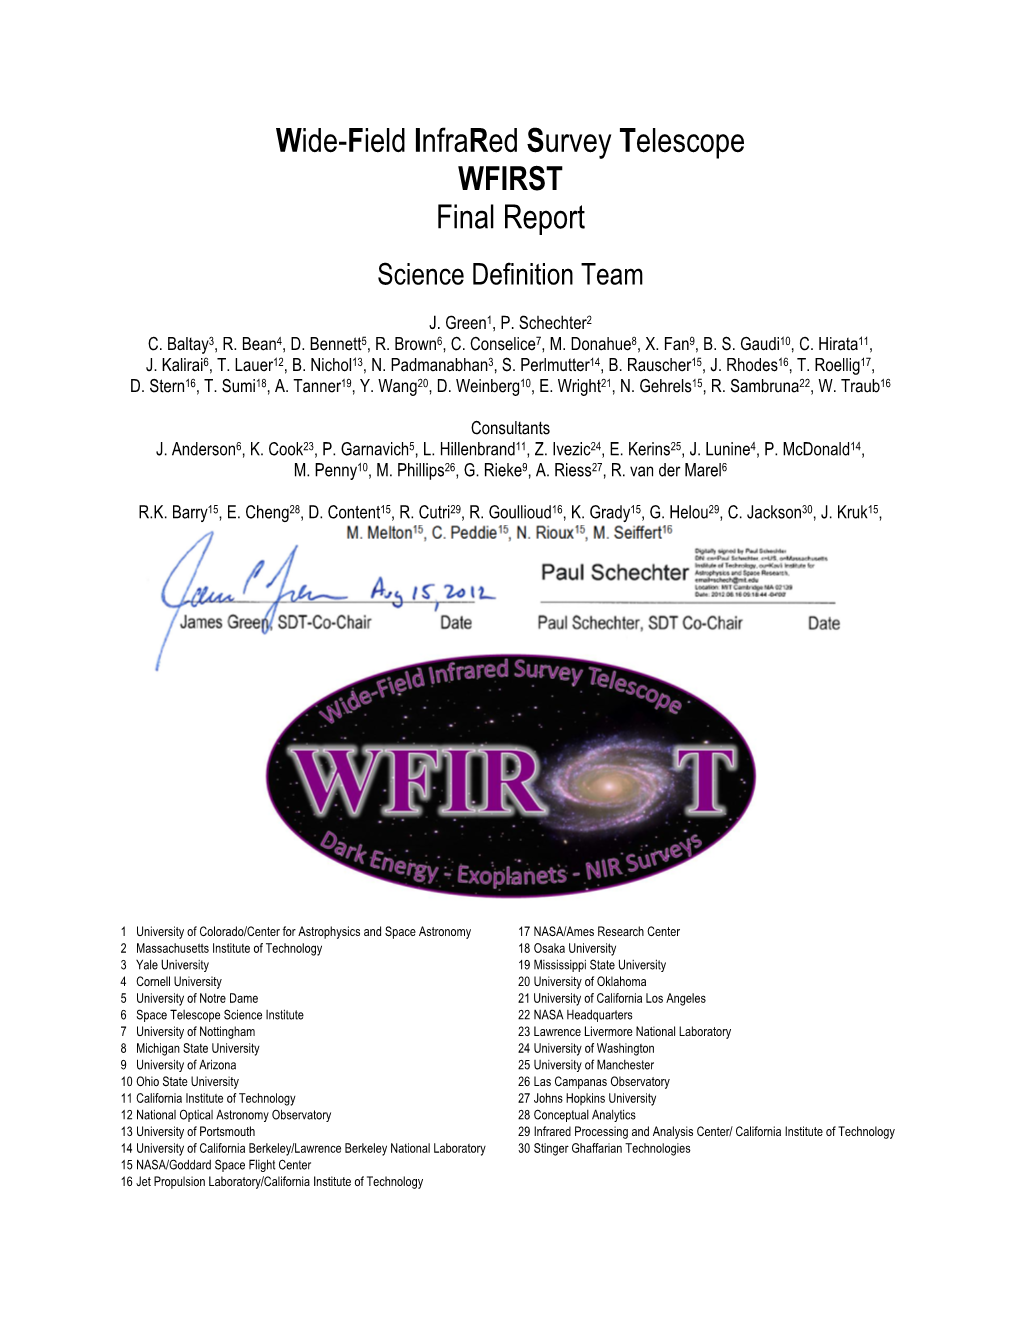 Wide-Field Infrared Survey Telescope WFIRST Final Report